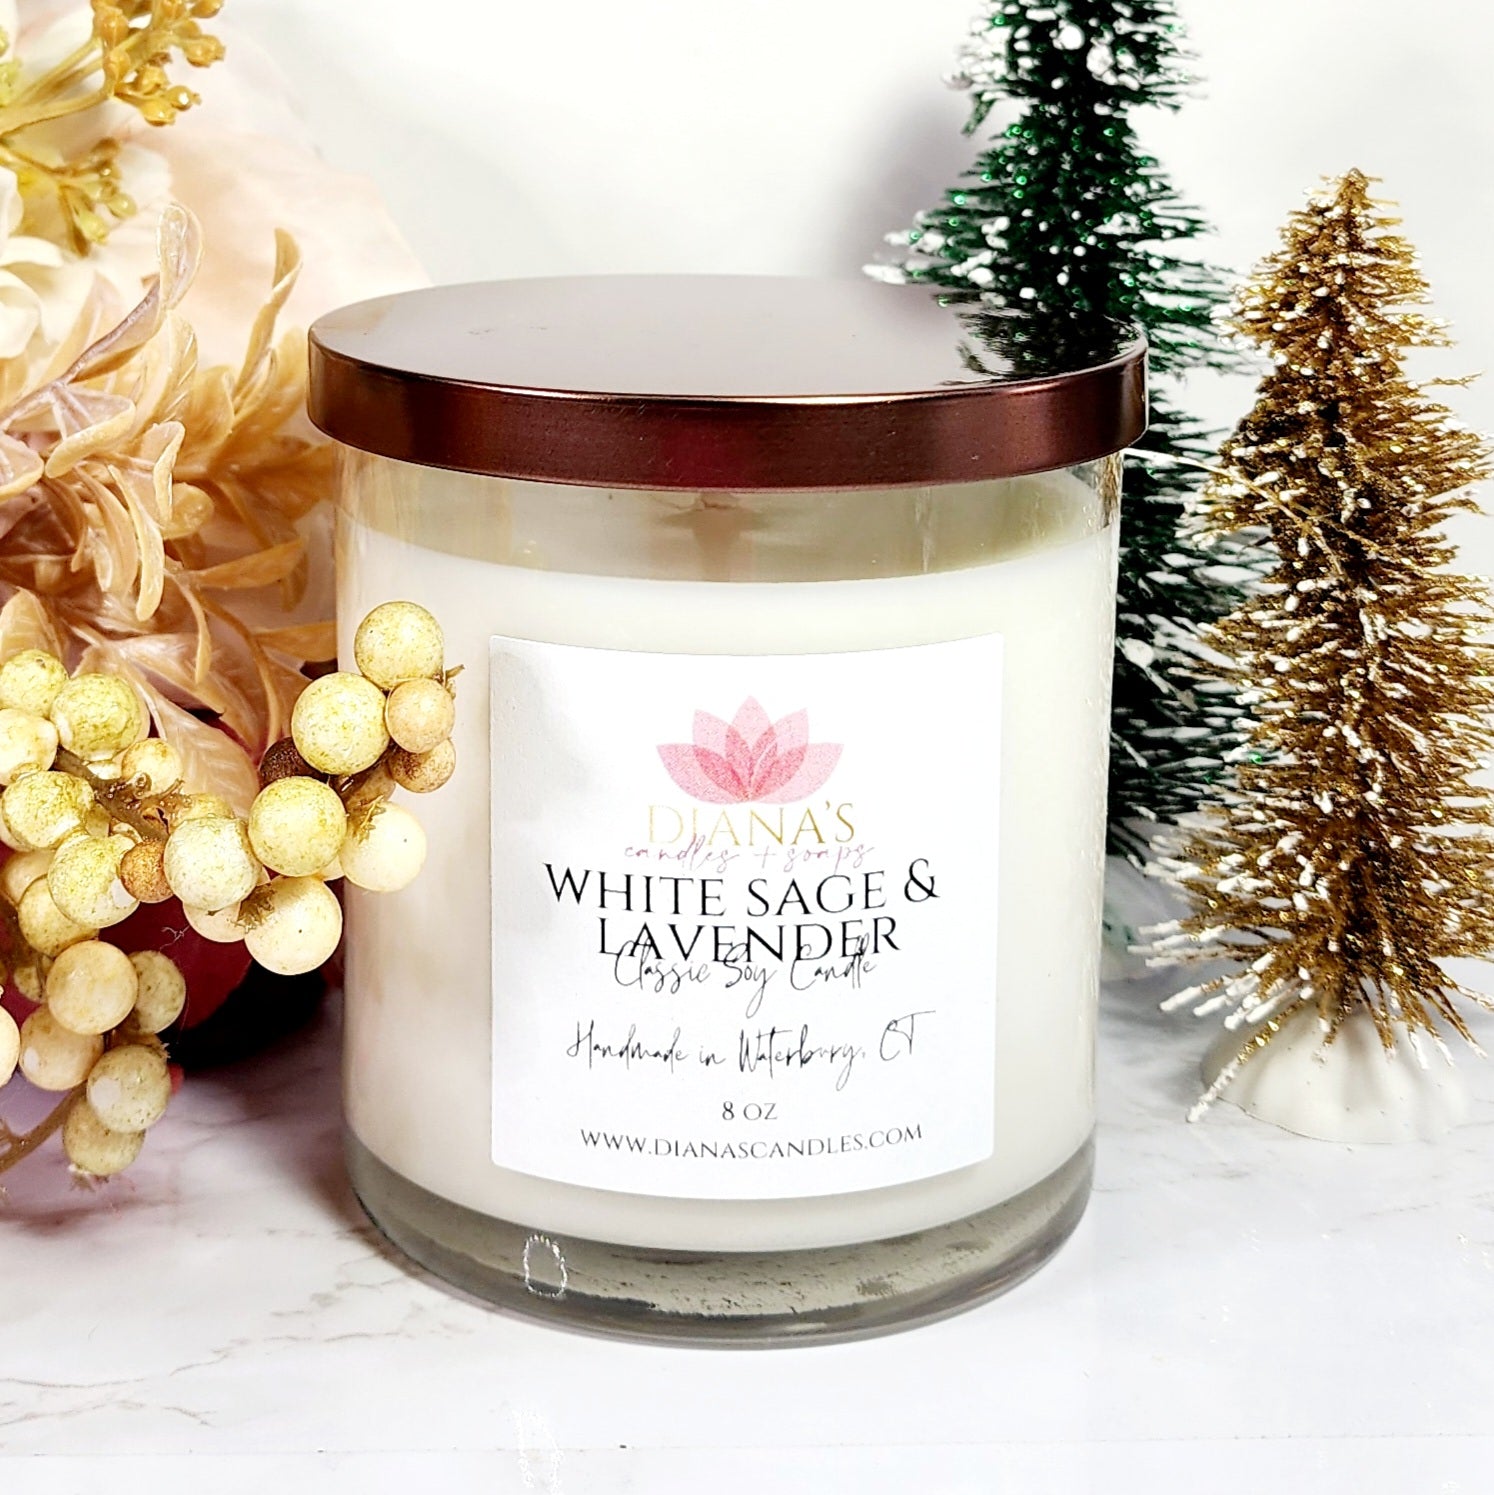 White Sage & Lavender Candle - Diana's Candles and Soaps 